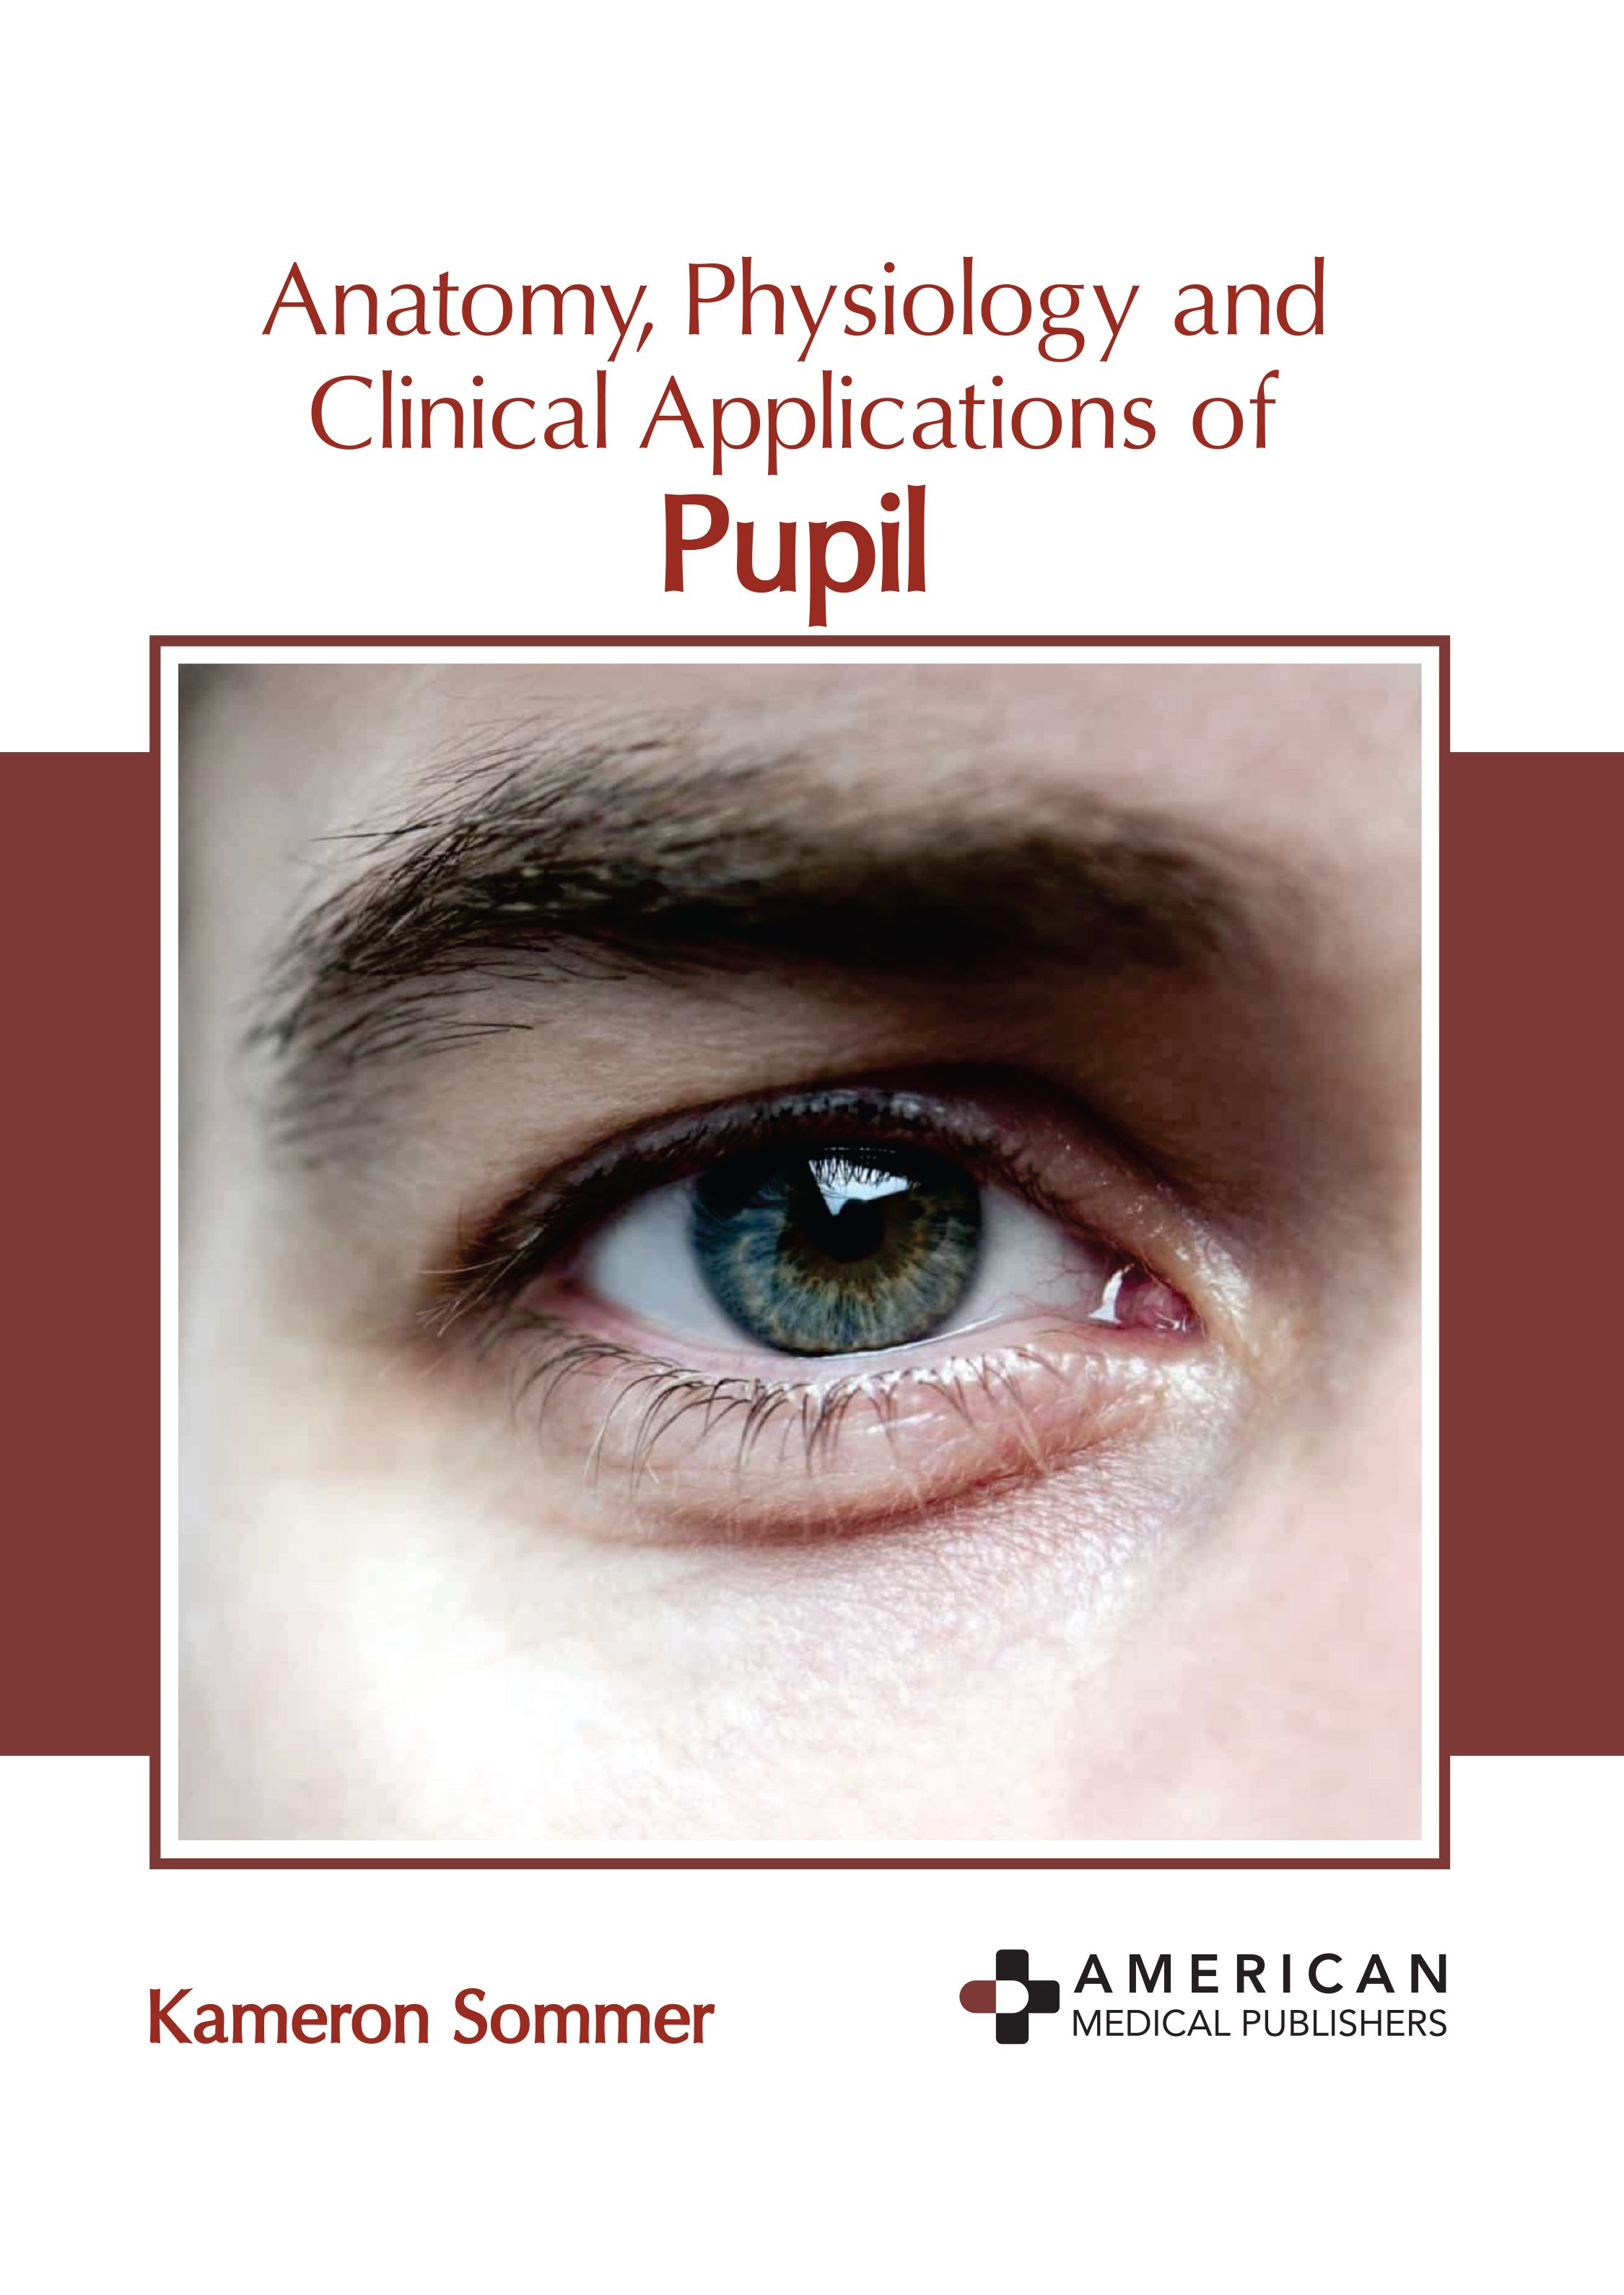 

exclusive-publishers/american-medical-publishers/anatomy-physiology-and-clinical-applications-of-pupil-9781639278718